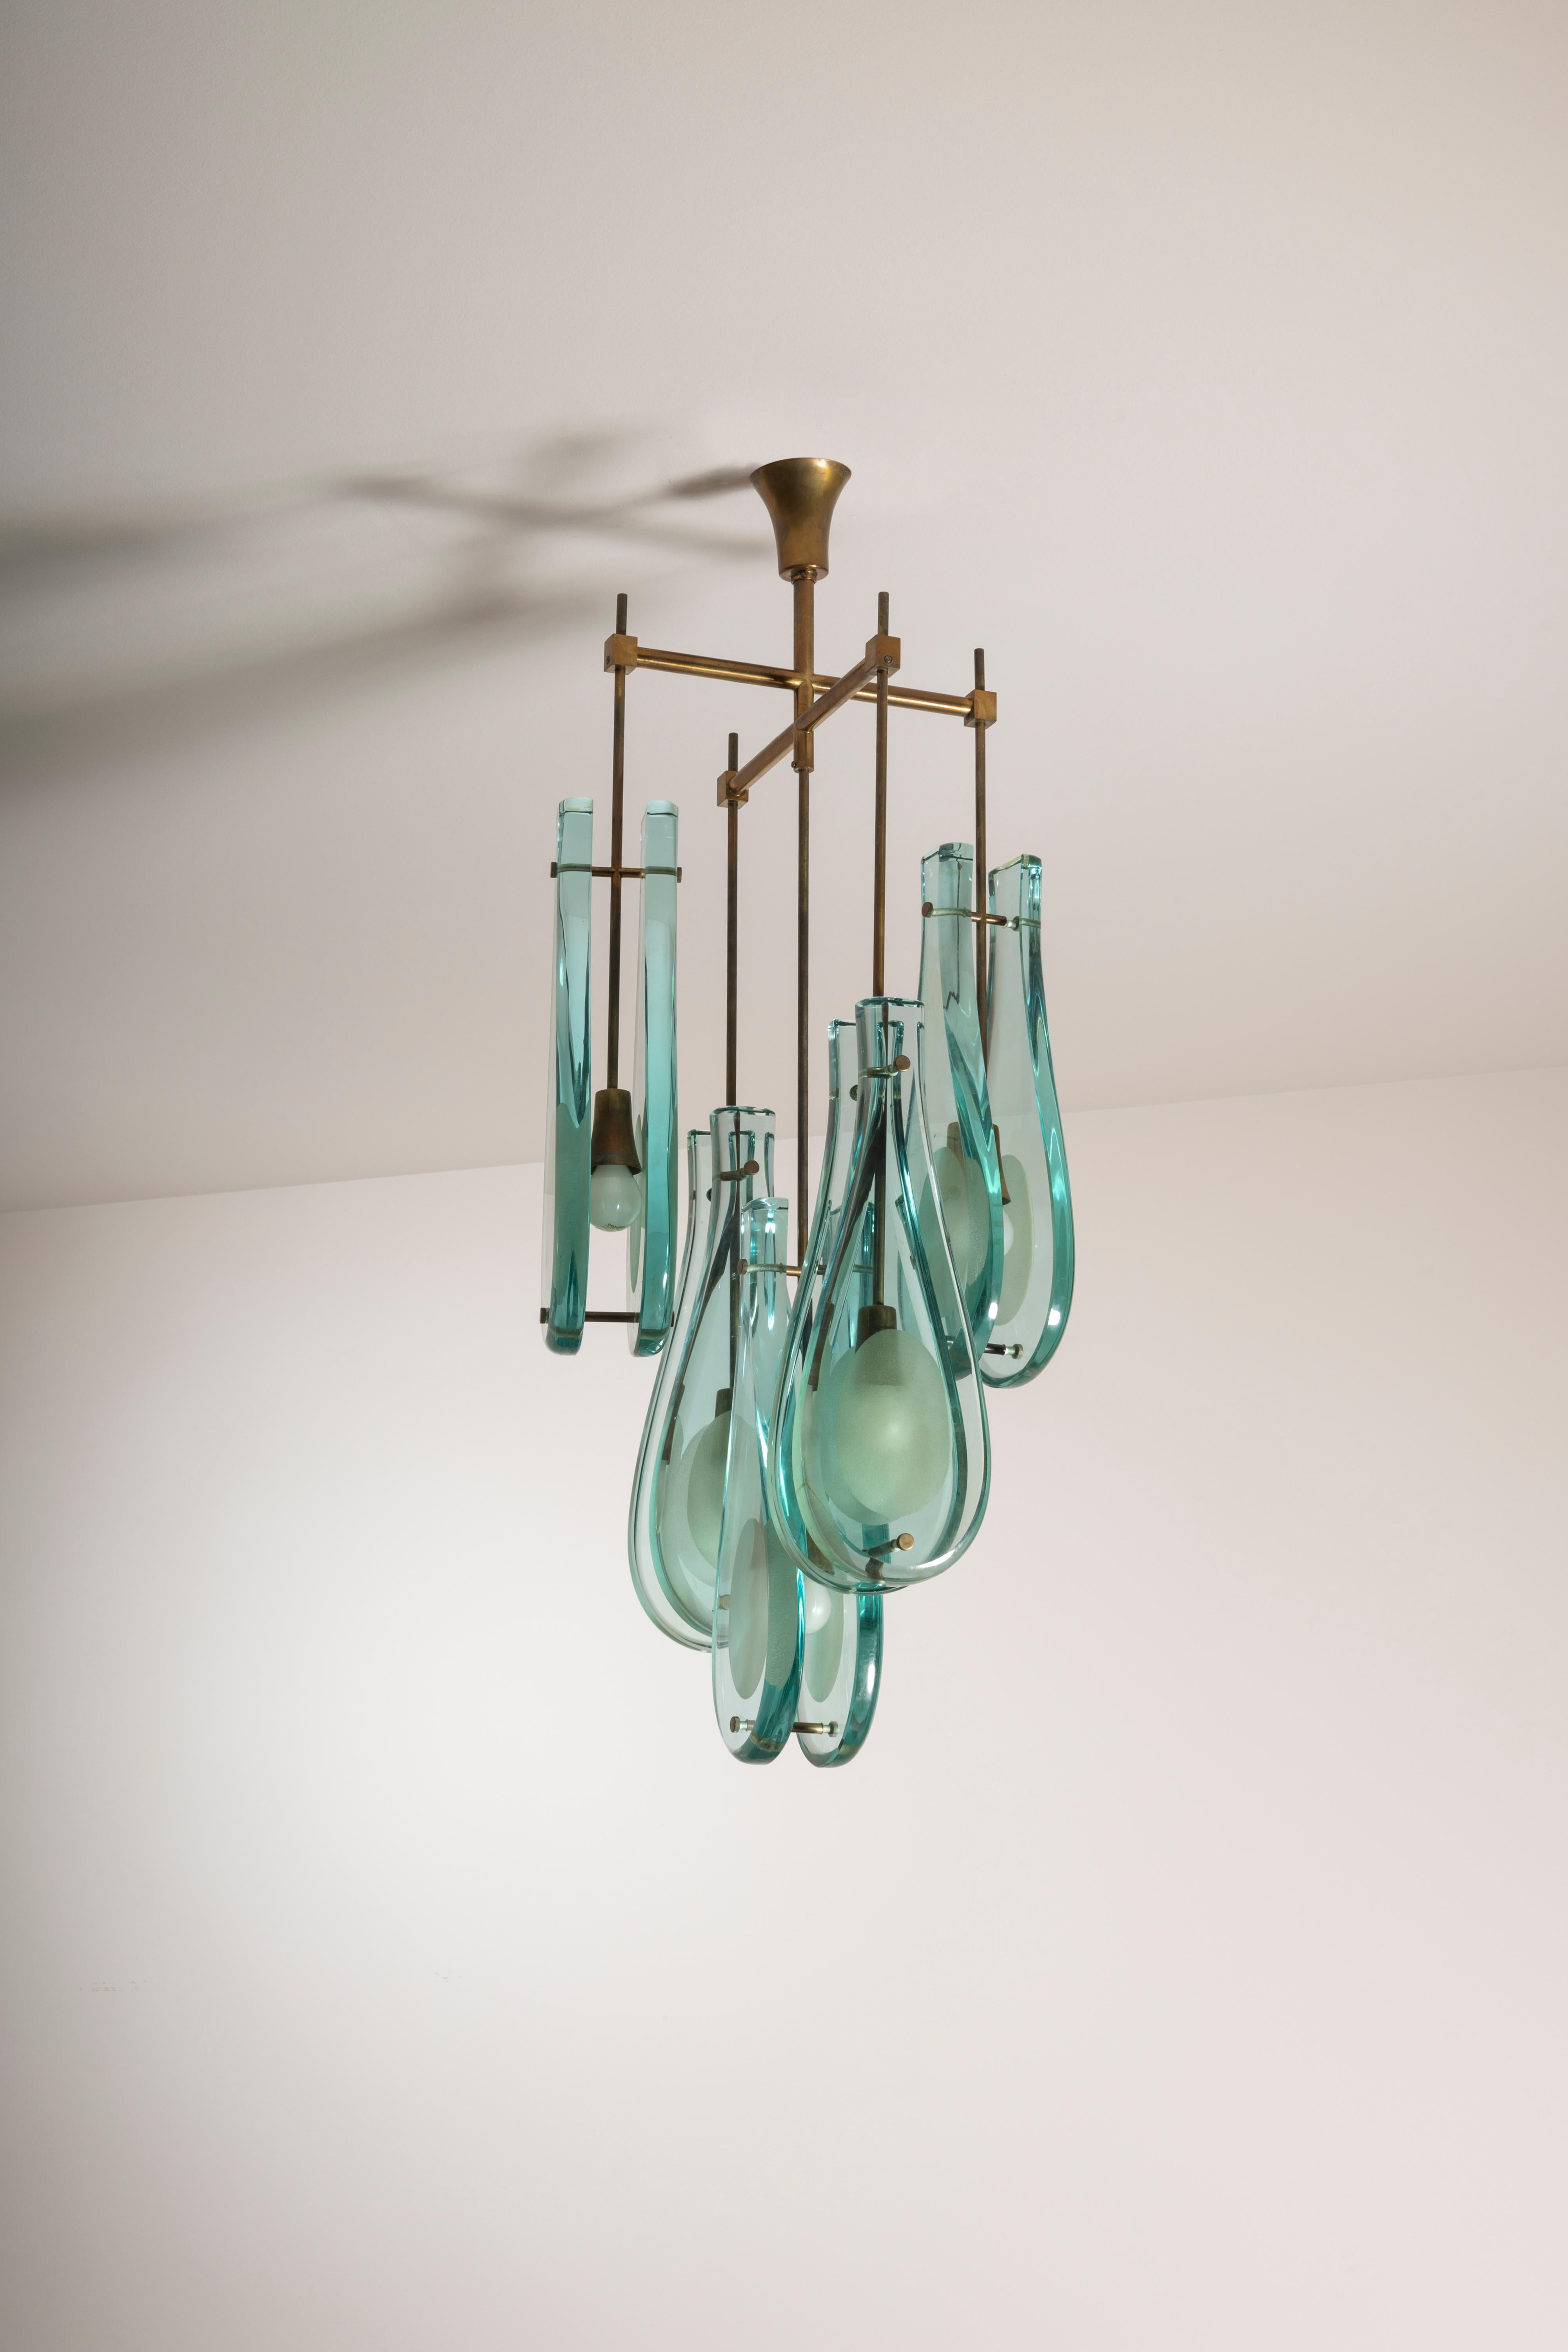 Brass and glass chandelier, designed by Max Ingrand, model 2338, manufactured by Fontana Arte during the 1960s.

This ceiling light boasts a commanding presence, characterized by its sophisticated and theatrical design. True to Max Ingrand's